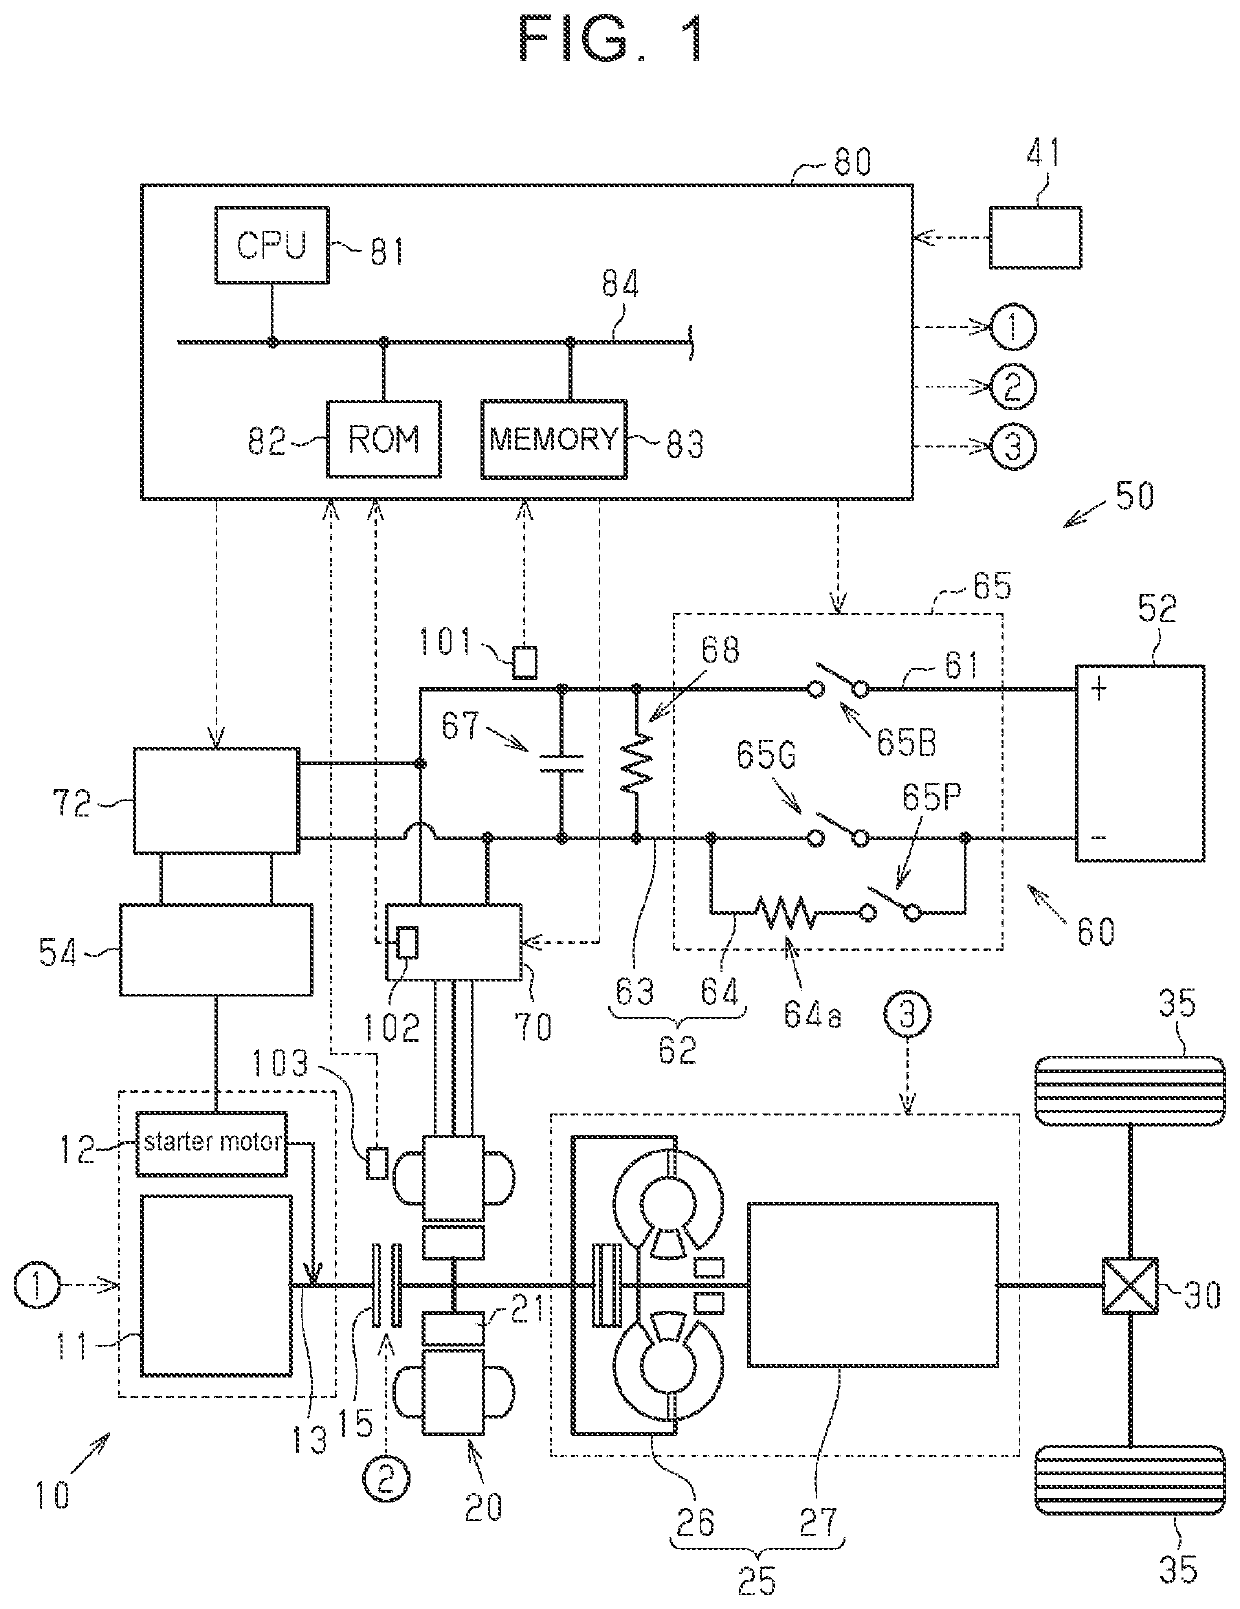 Drive system for hybrid vehicle